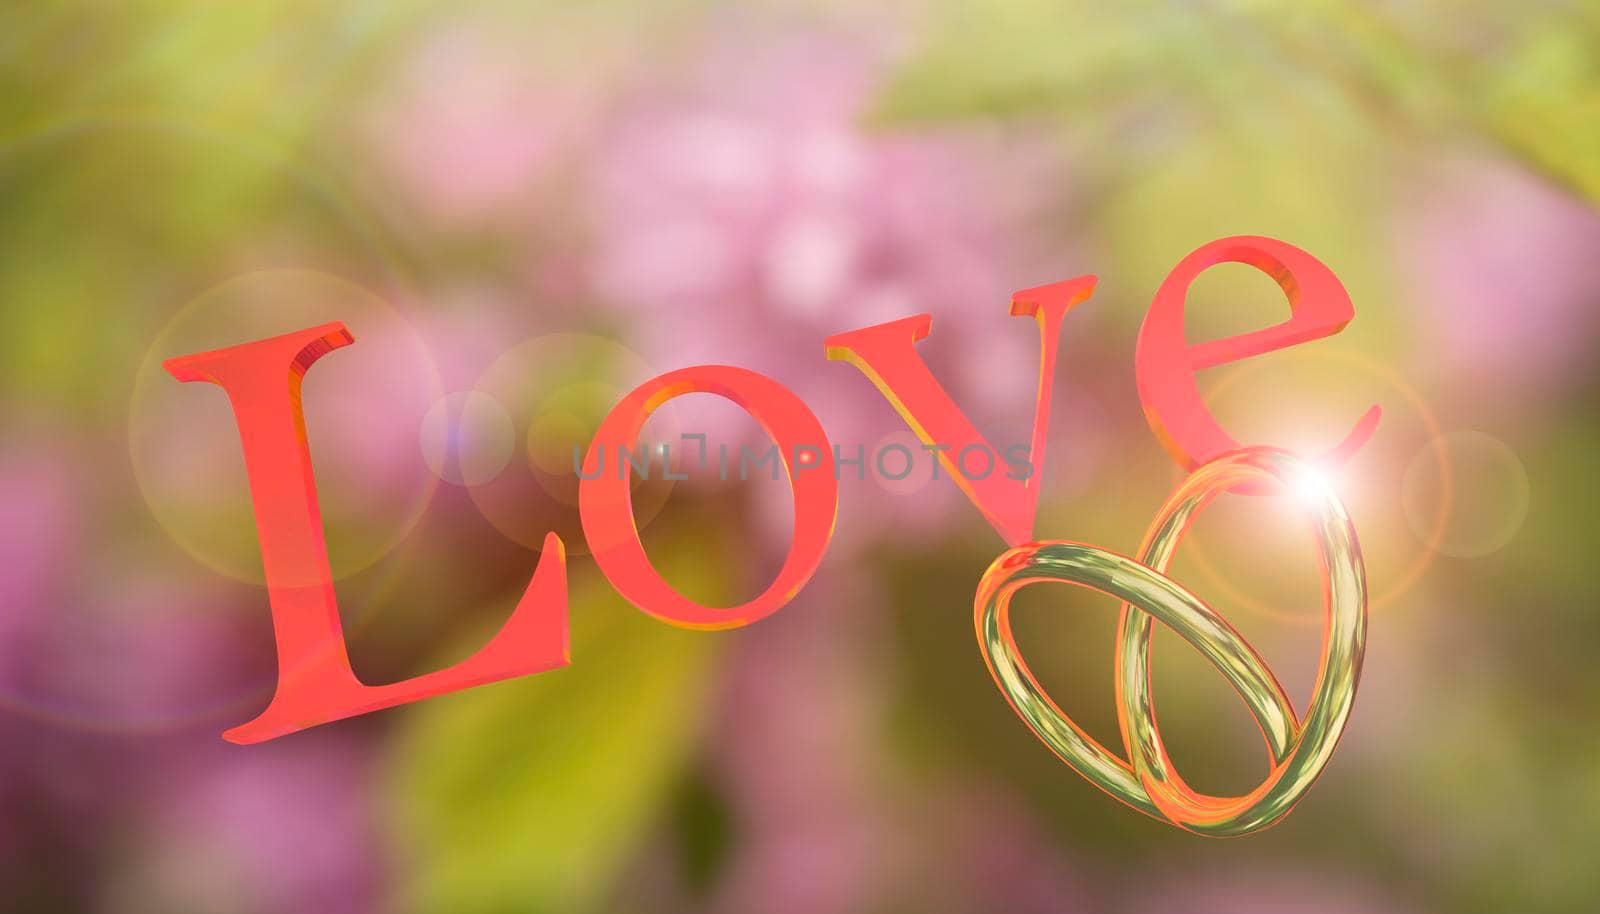 Abstract background with the text love on a blurry floral background. by Vvicca